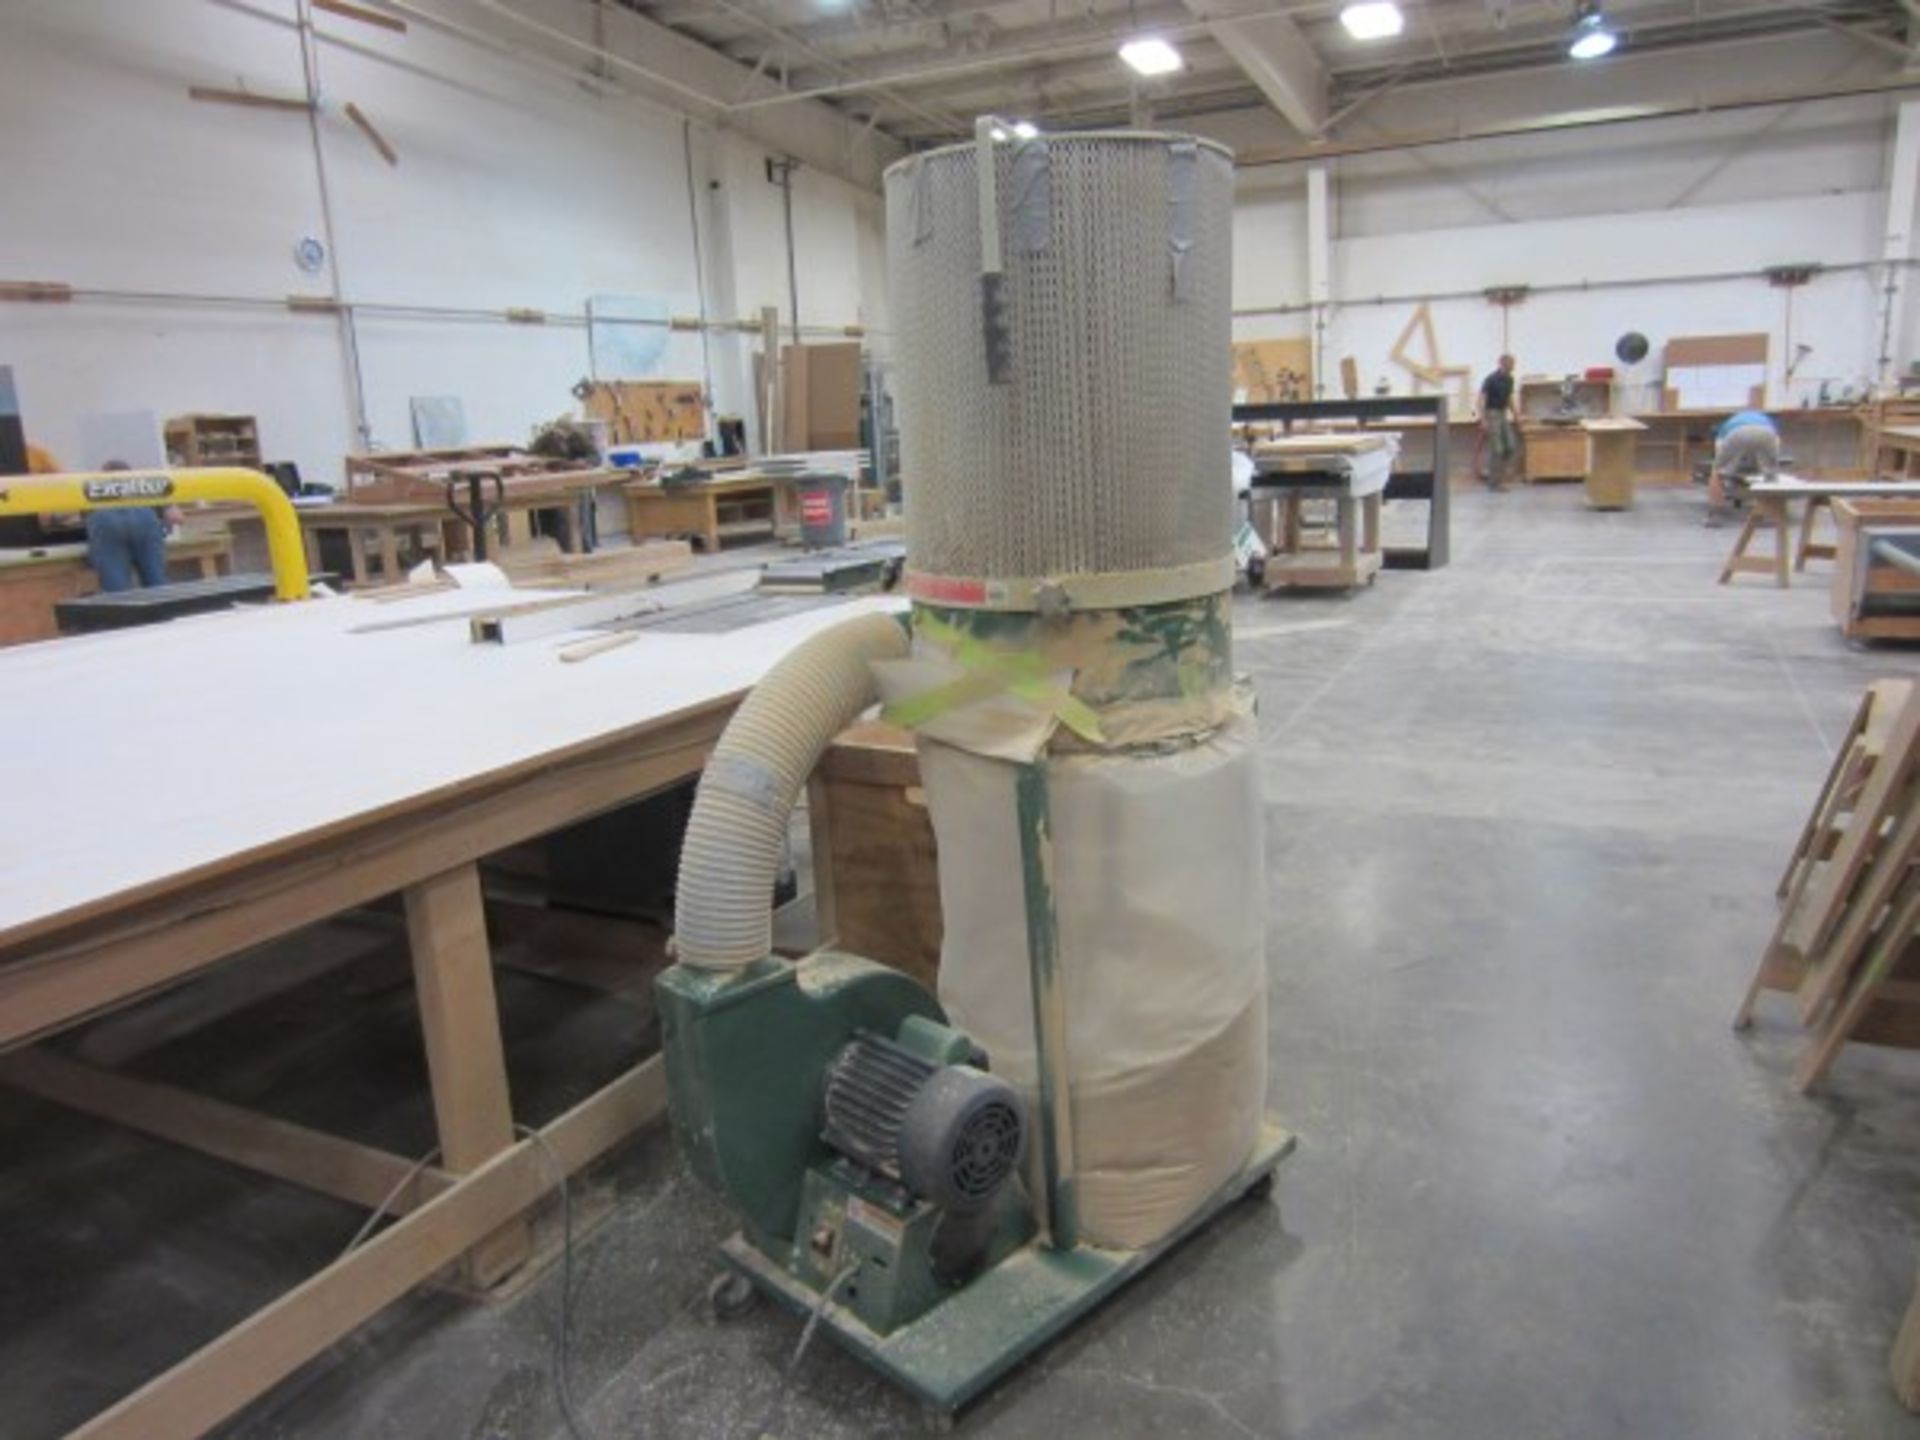 CANWOOD 1 BAG DUST COLLECTOR, MODEL DC002A, 240VÂ -Â NOTE: MUST STAY IN PLACE UNTIL AUG. 17TH!